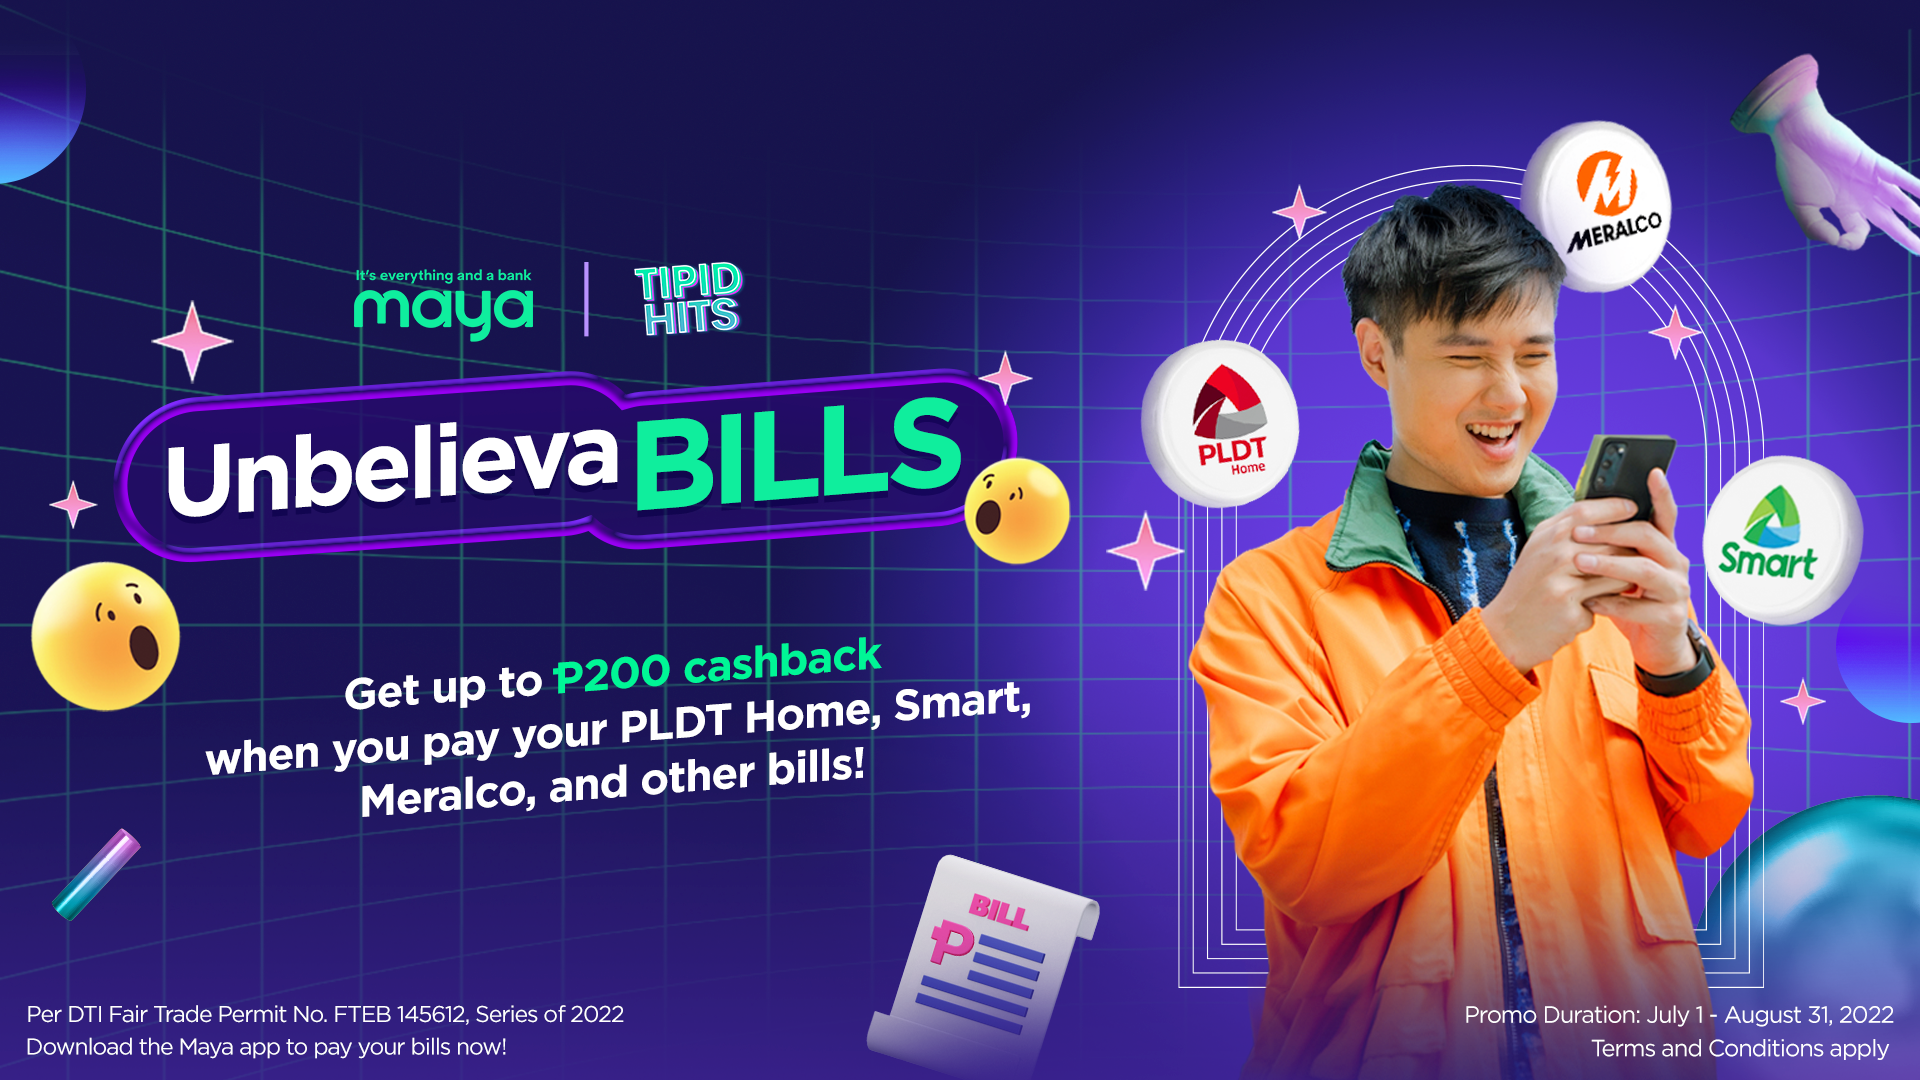 Get up to P200 cashback when you pay your bills via Maya!